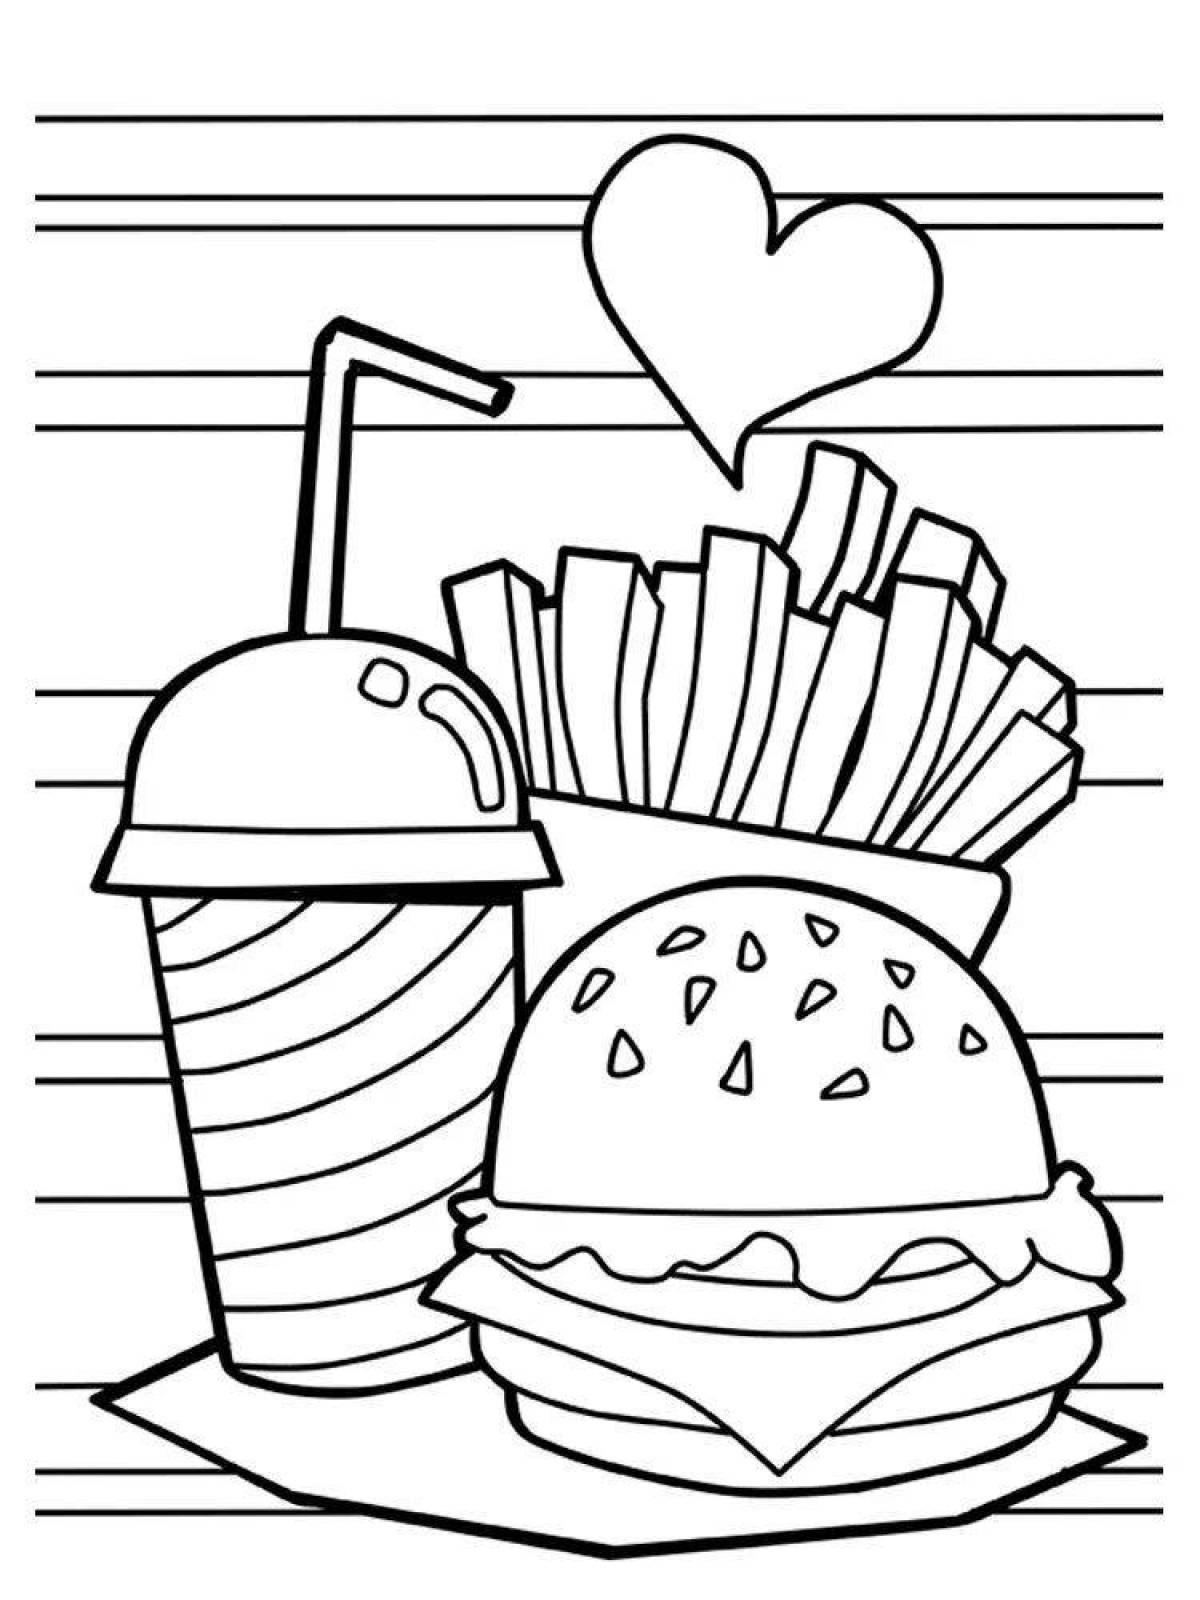 Burger coloring book for kids